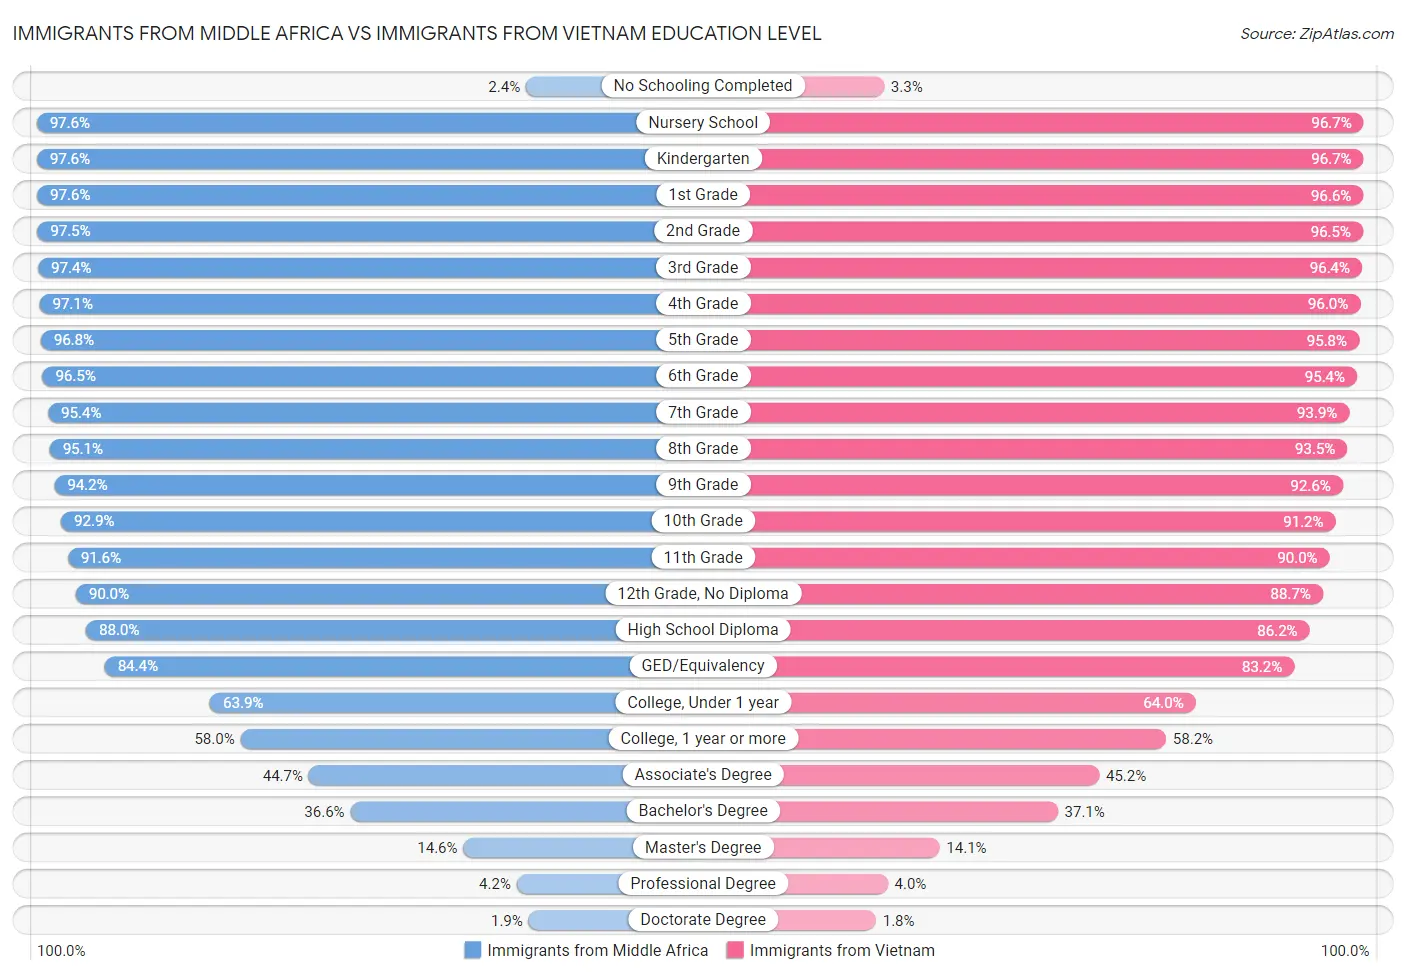 Immigrants from Middle Africa vs Immigrants from Vietnam Education Level